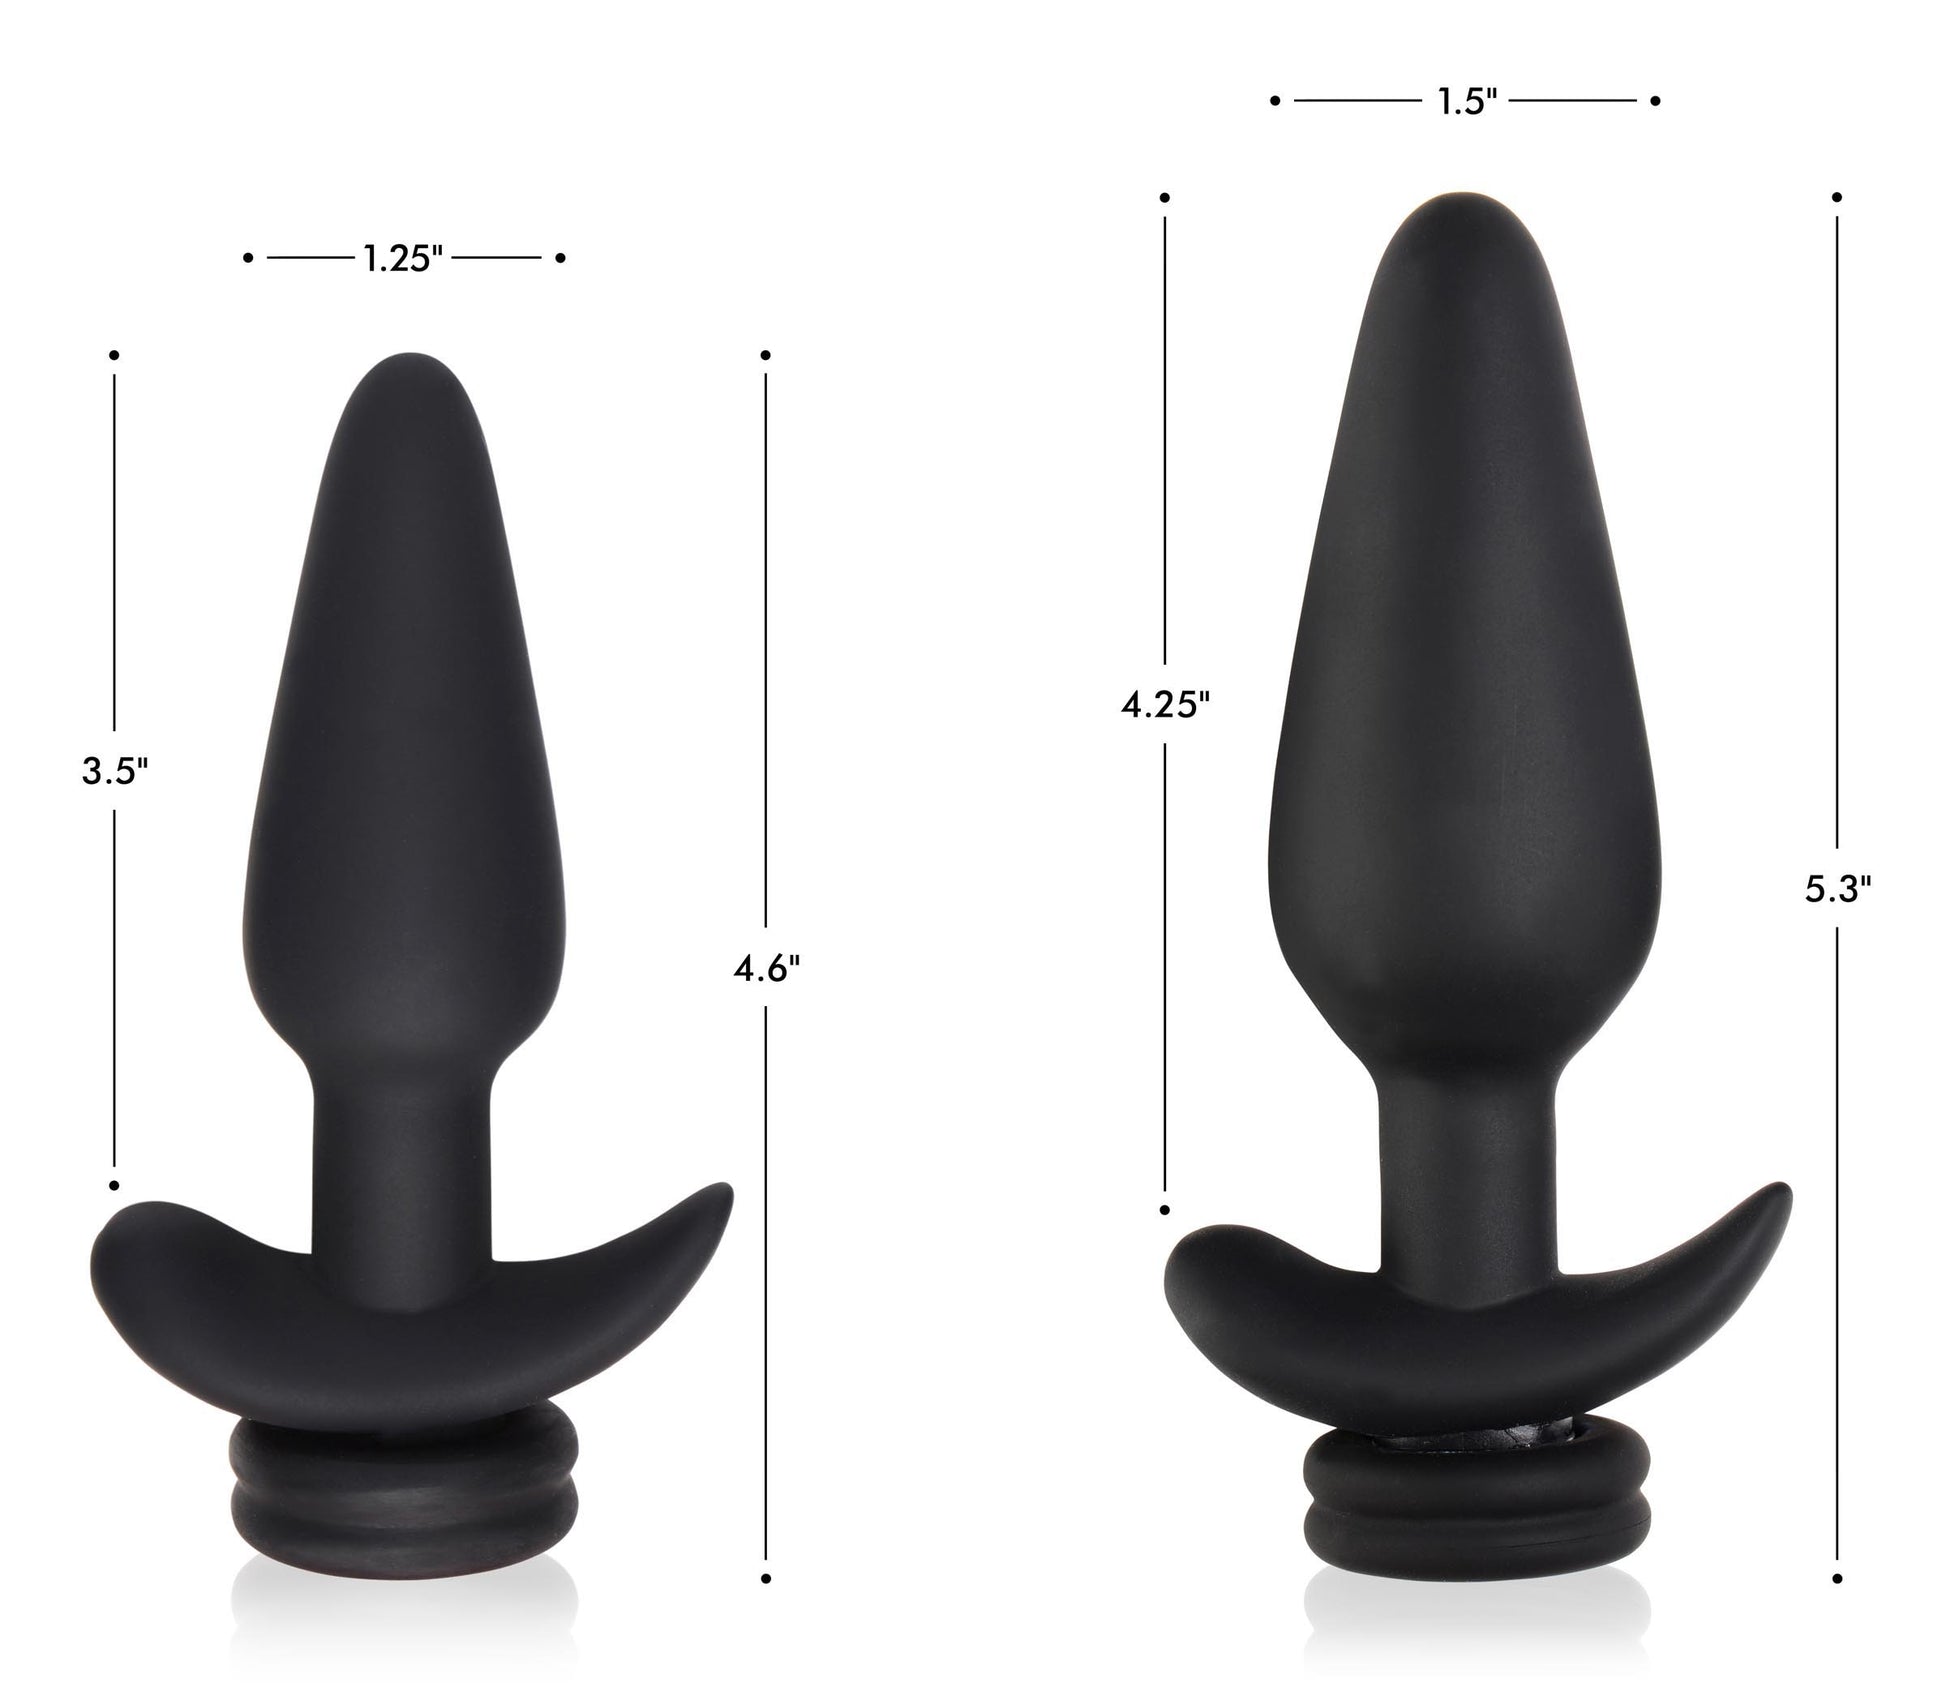 Interchangeable 10X Vibrating Silicone Anal Plug with Remote - Large - UABDSM